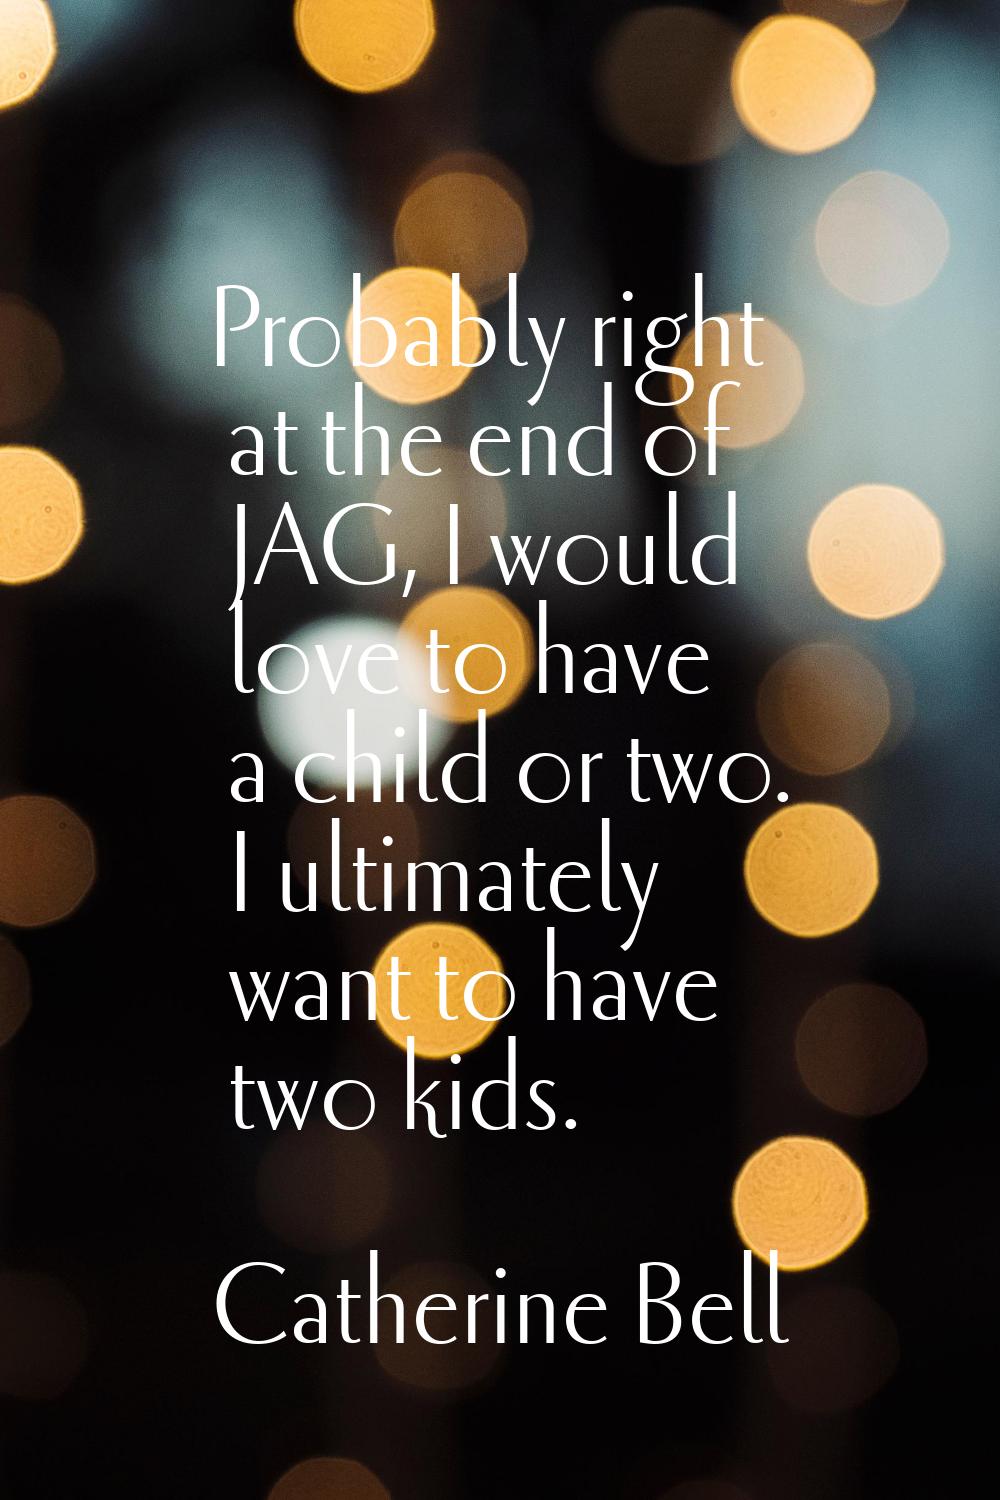 Probably right at the end of JAG, I would love to have a child or two. I ultimately want to have tw